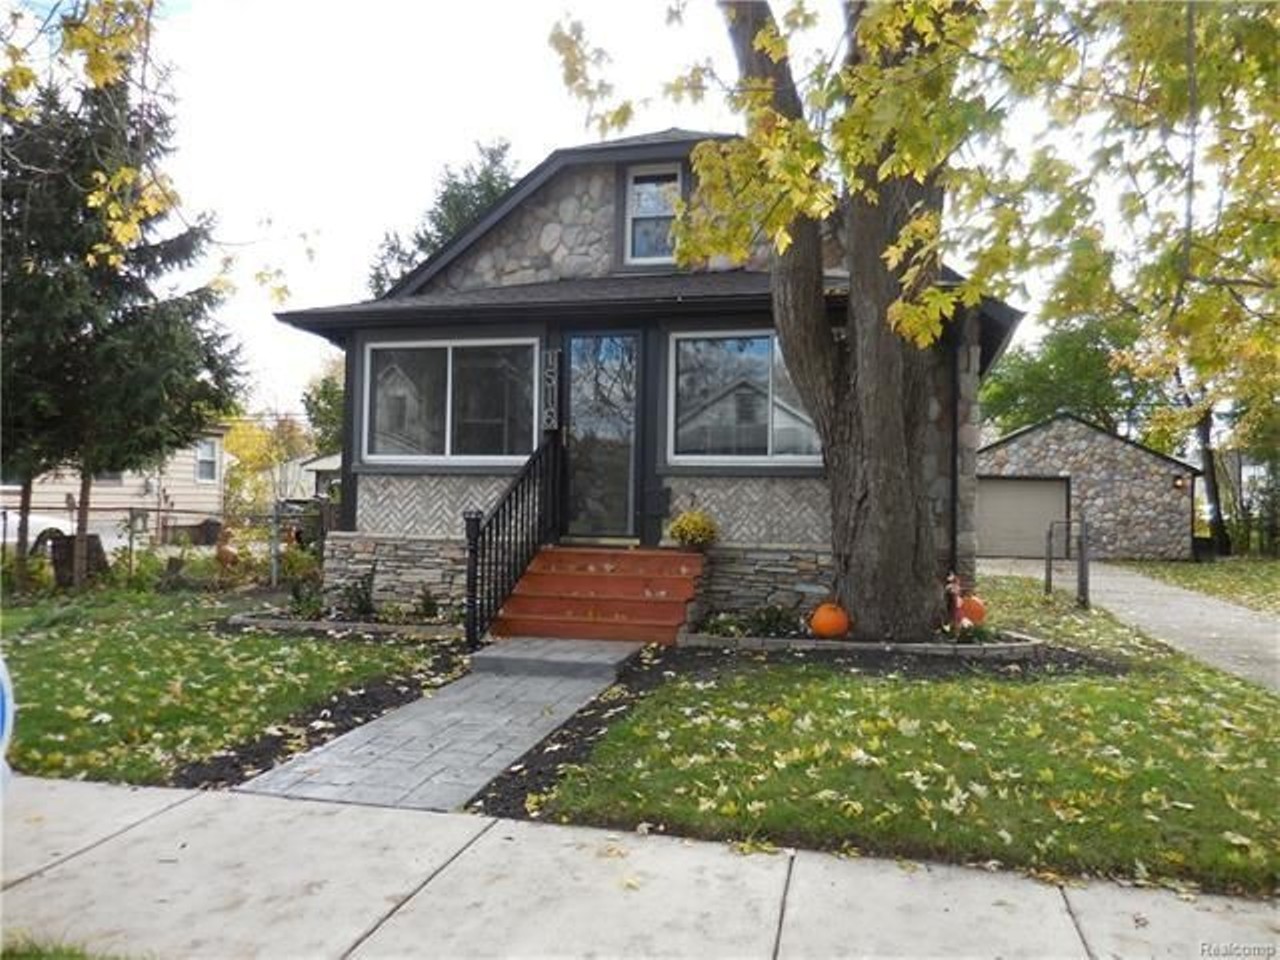 1516 Browning St, Ferndale 
$130,000
4 beds, 1 bath, 950 sq ft